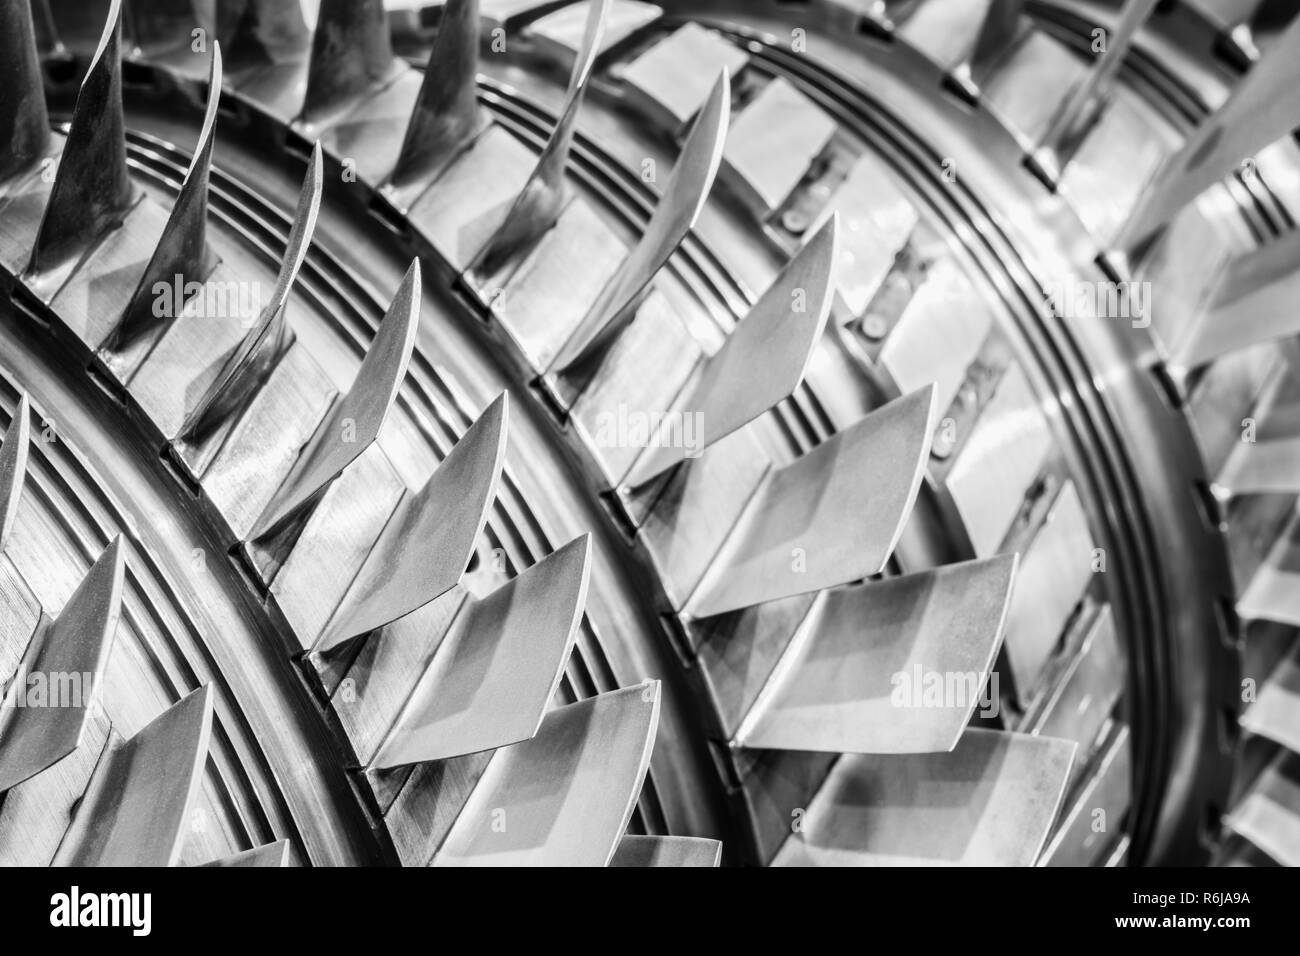 Steel blades of turbine propeller. Close-up view. In B/W. Selected focus on foreground Stock Photo